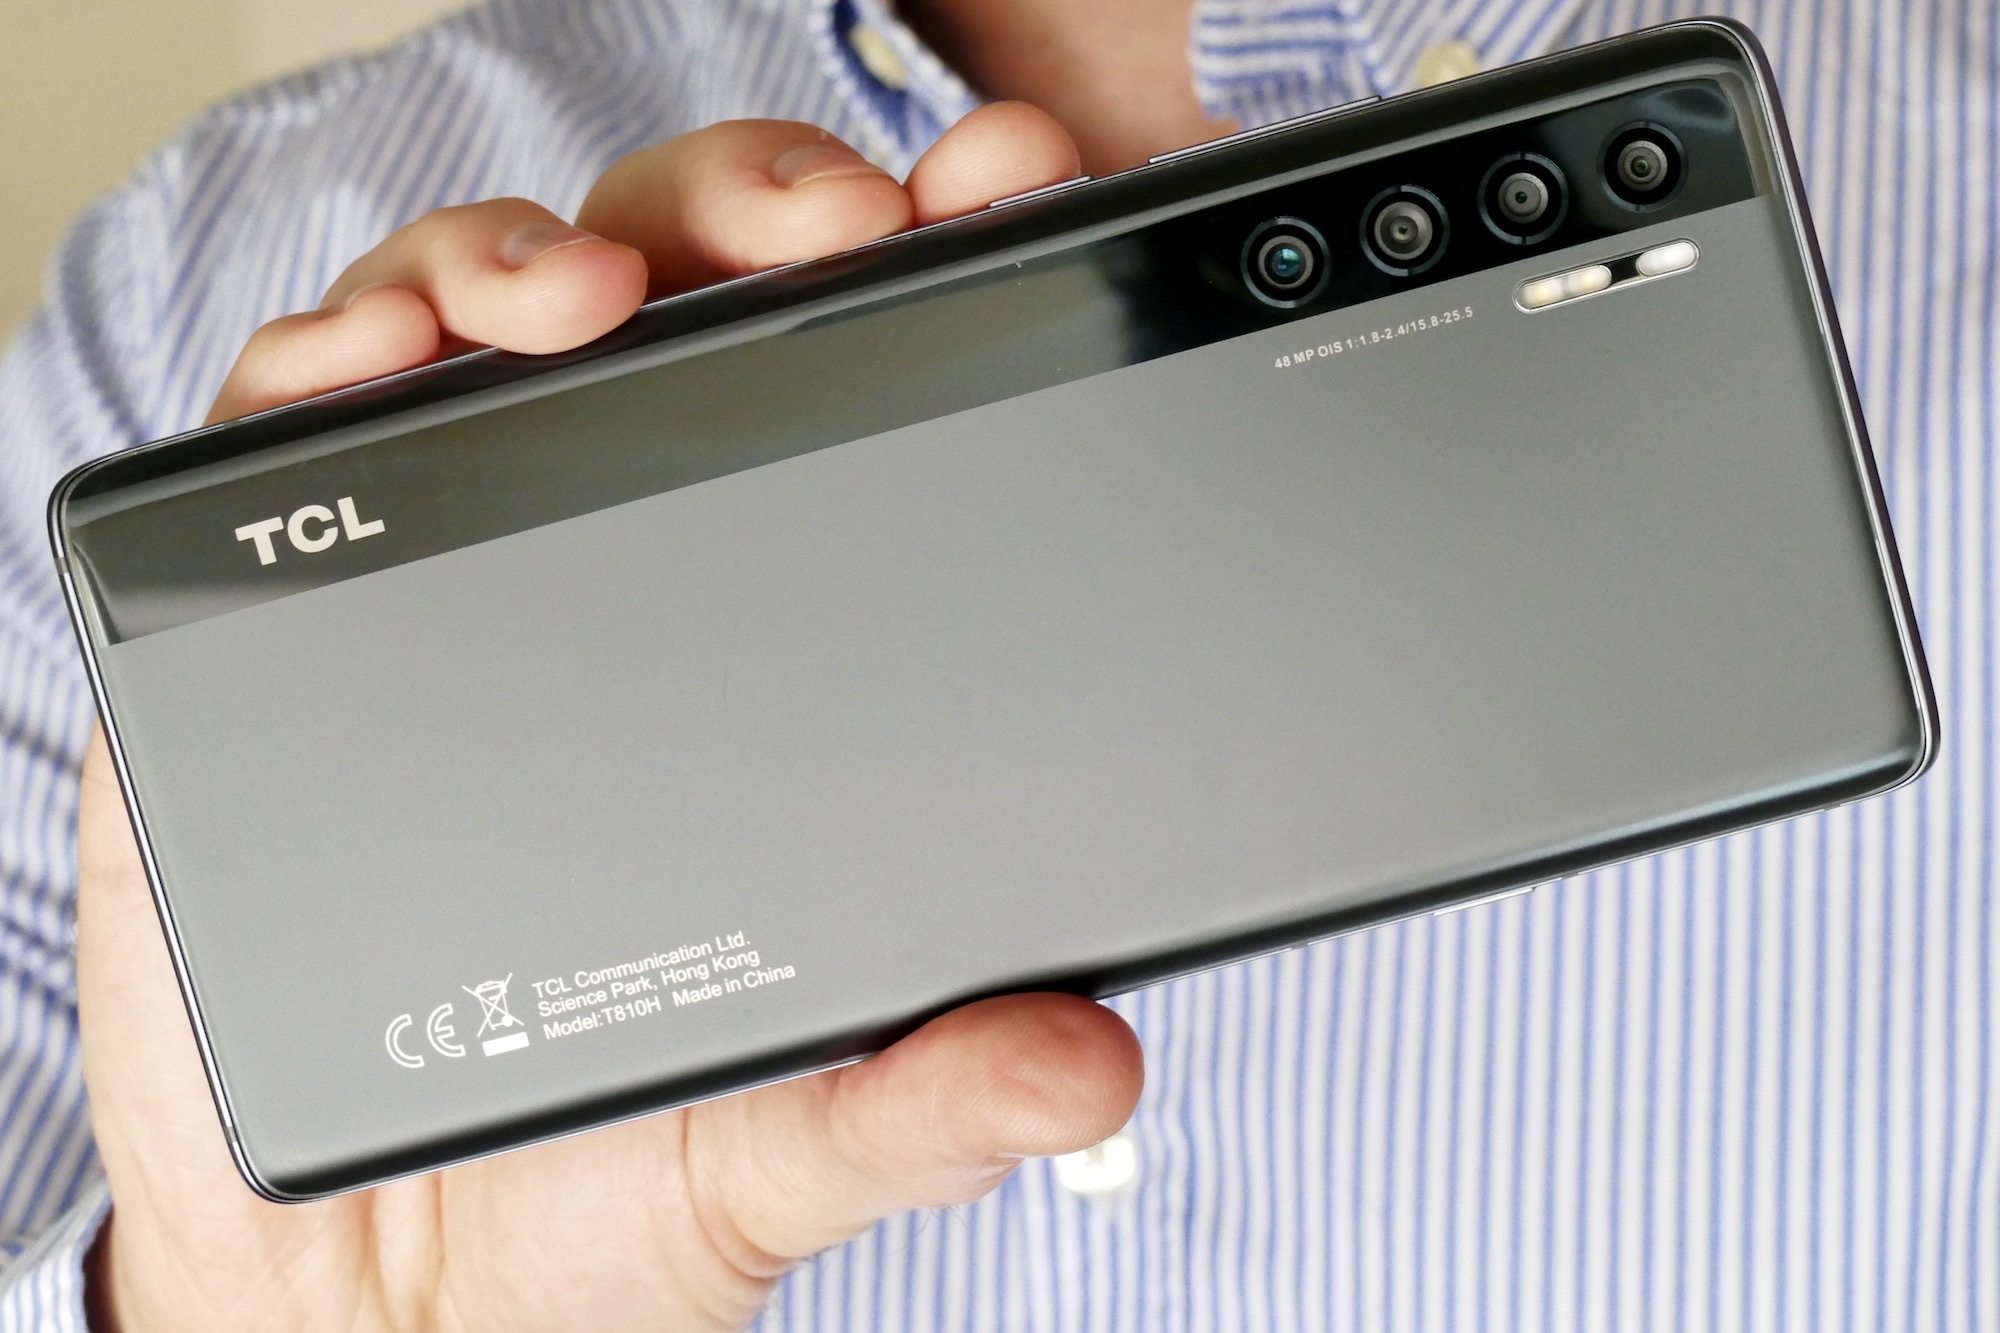 how-to-reboot-tcl-phone